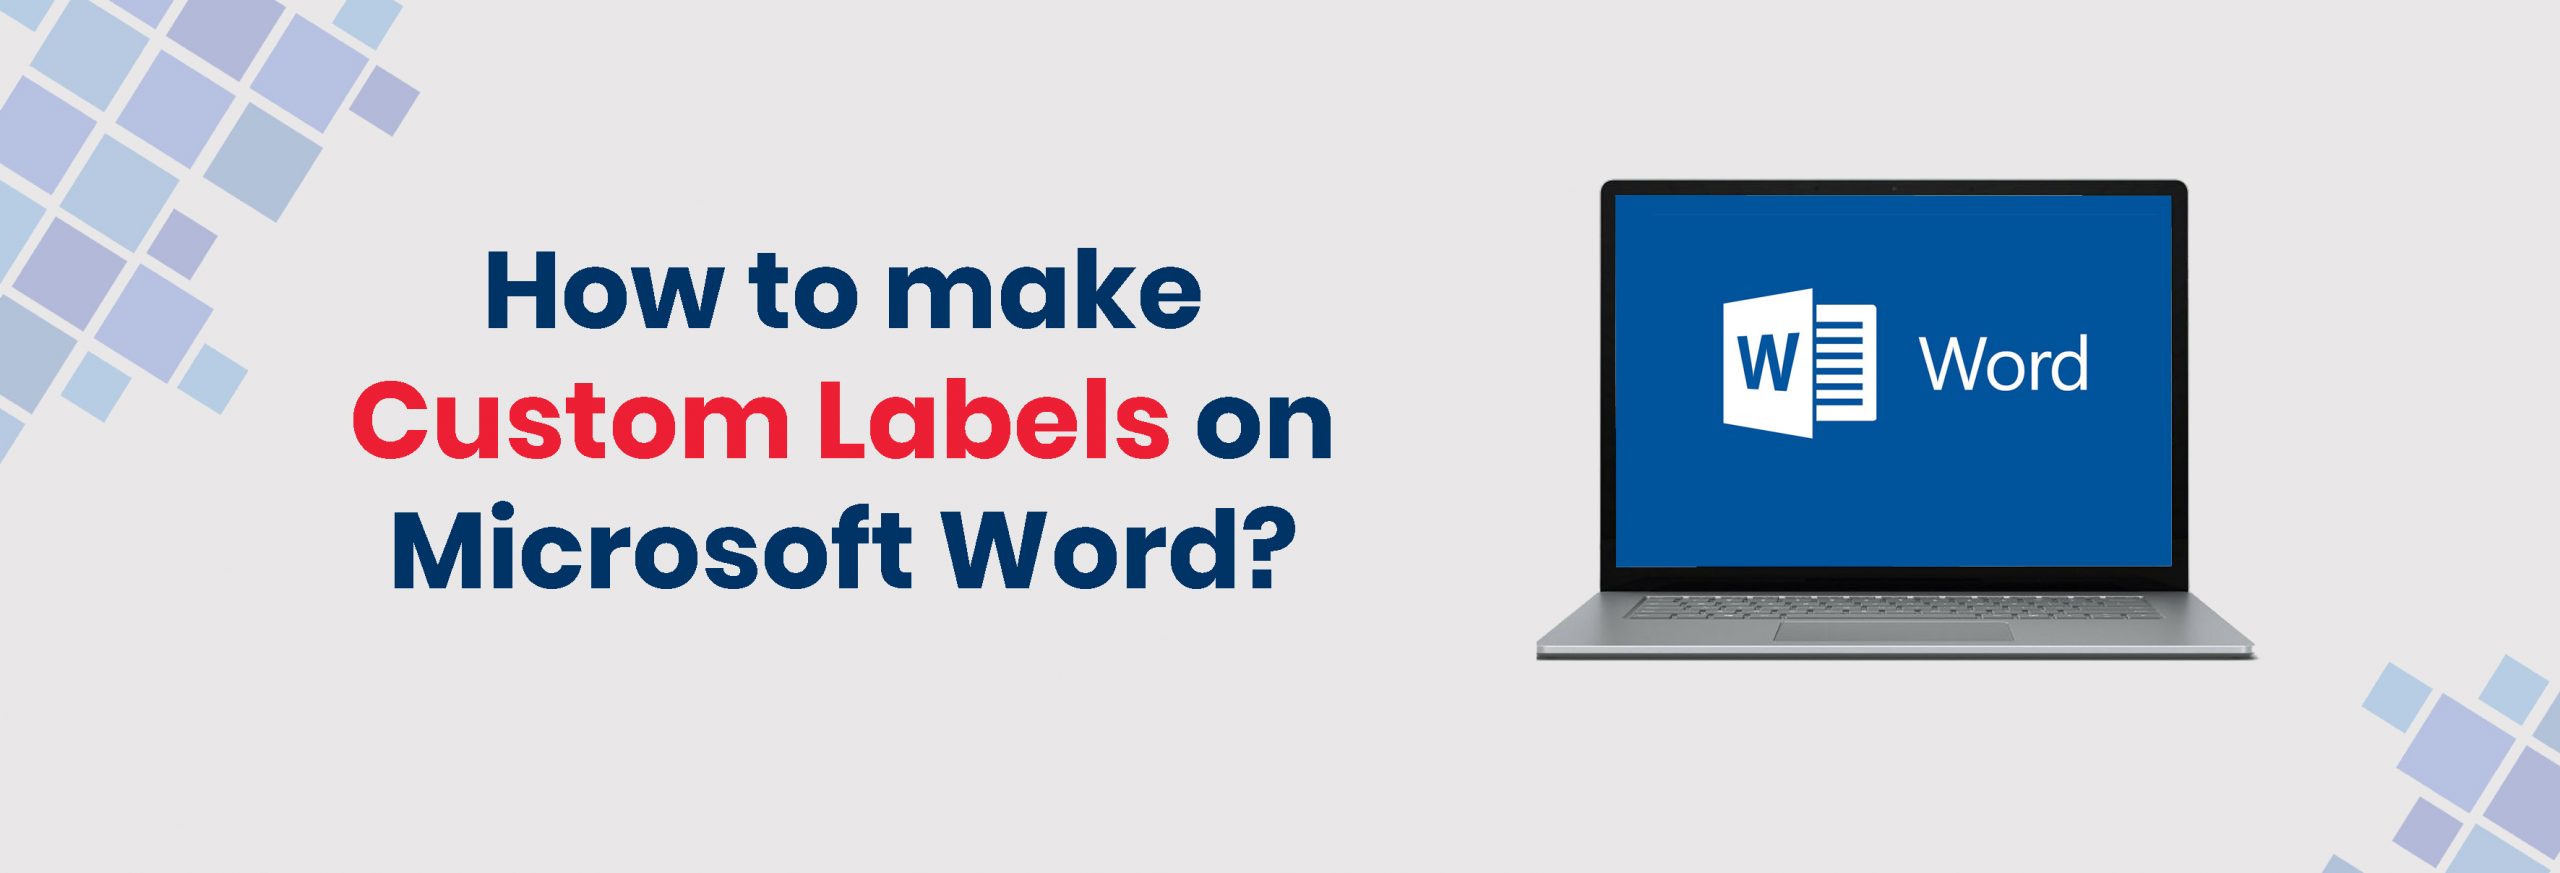 how-to-make-custom-labels-on-microsoft-word-enko-products